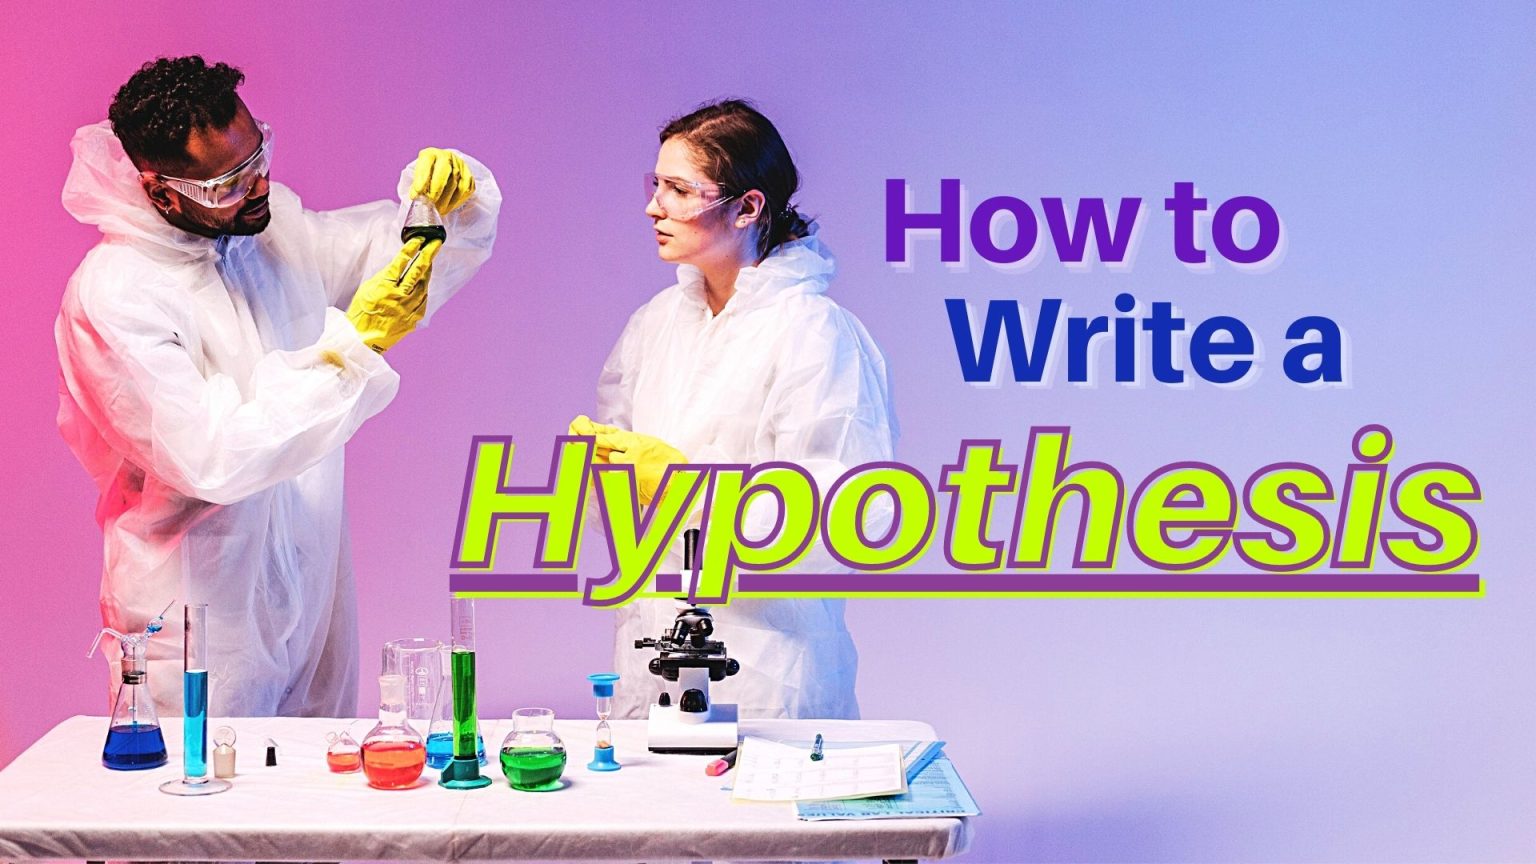 how to write a hypothesis reddit